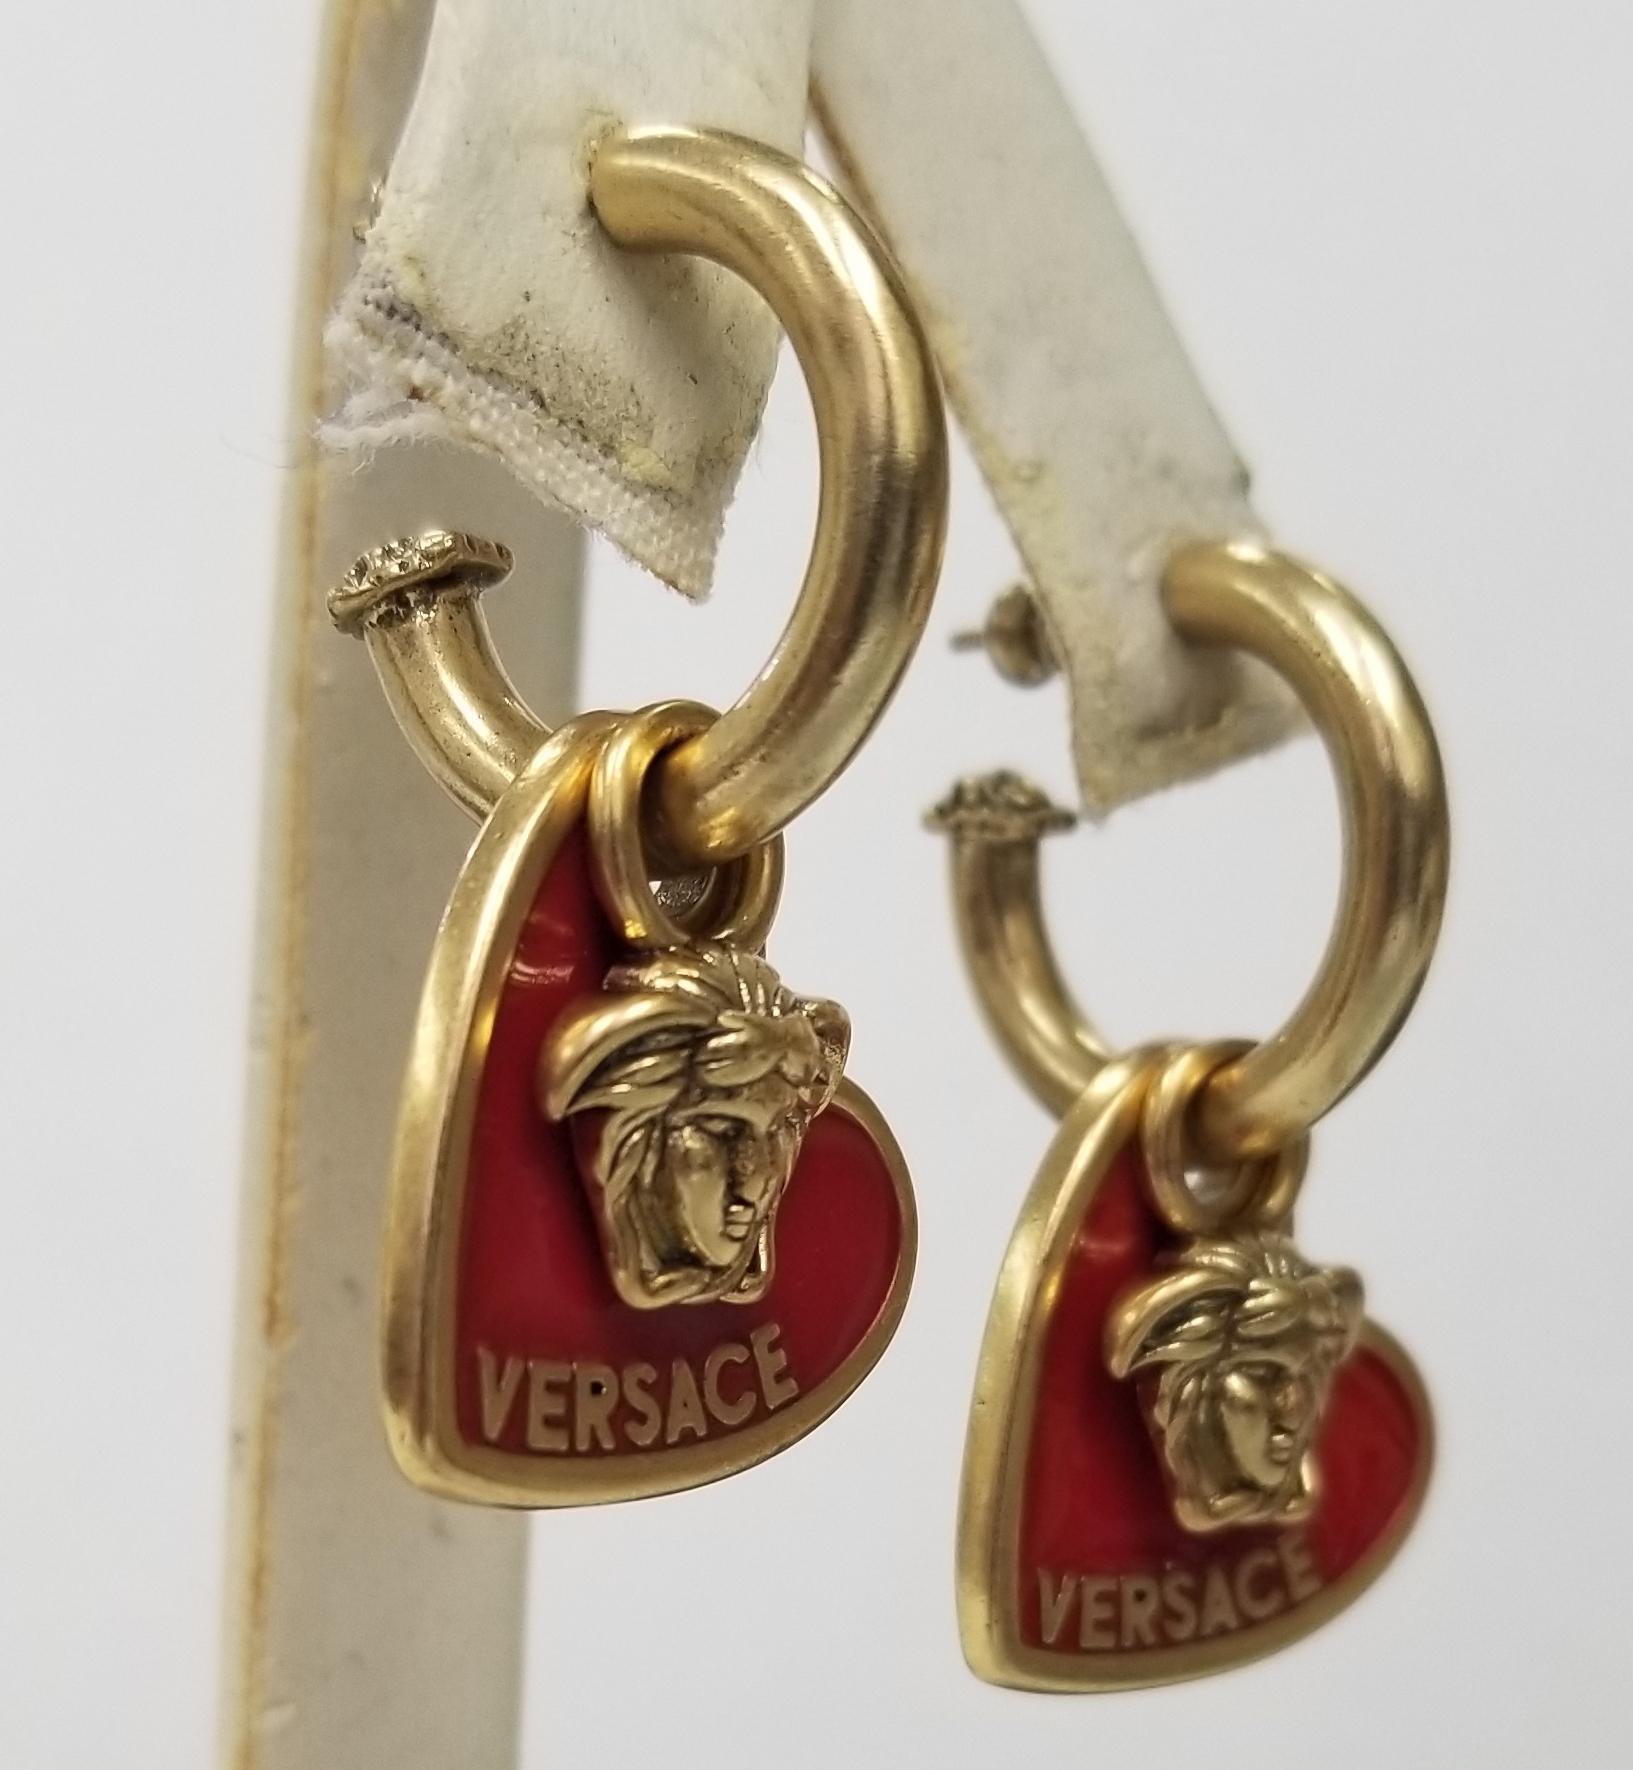 Versace Versace
Versace #Versace #Red #Heart #Medusa #Earrings #ValentinesDay